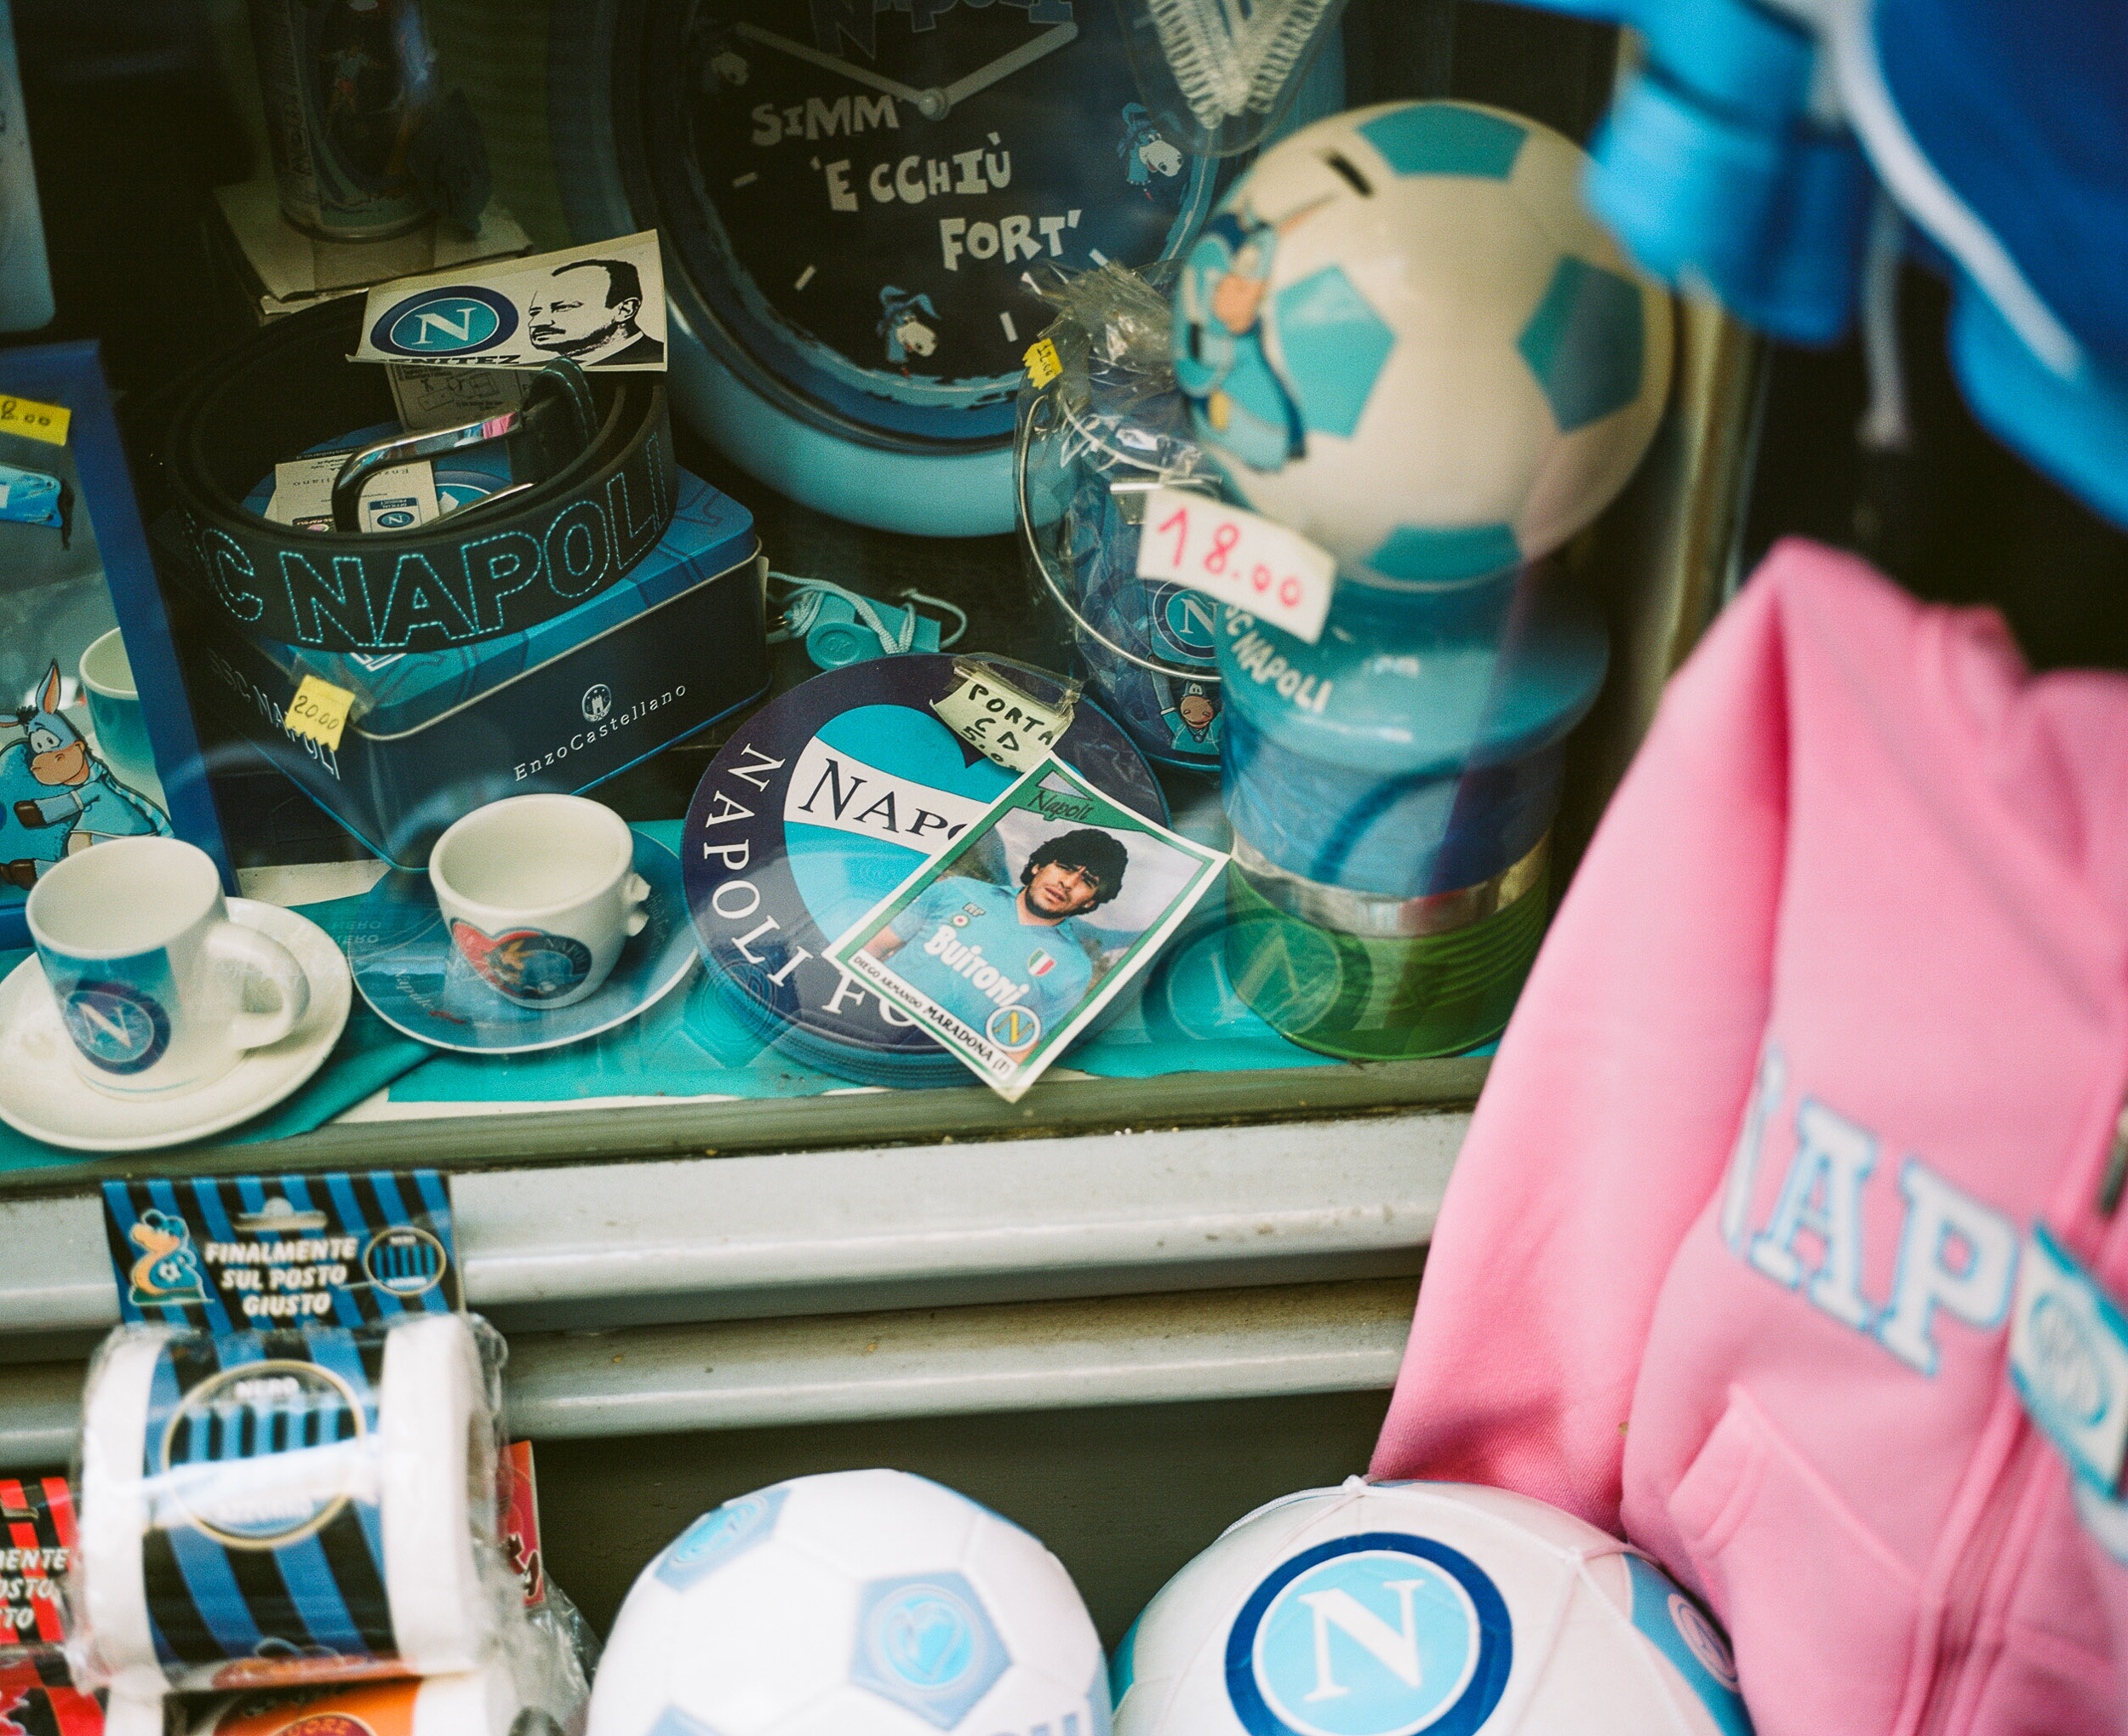 Maradona card and other sports paraphinalia in a window in Naples, Italy